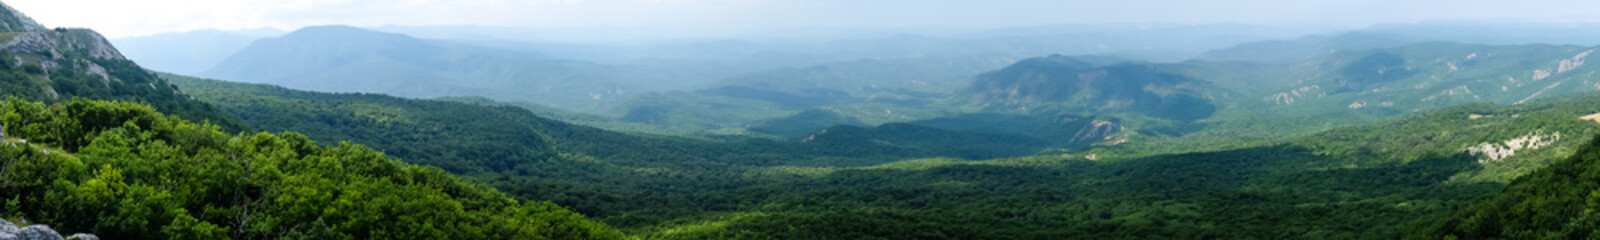 A view of the mountains covered with dense forest from the upper plateau of the Chatyr-Dag mountain range in Crimea. Panorama